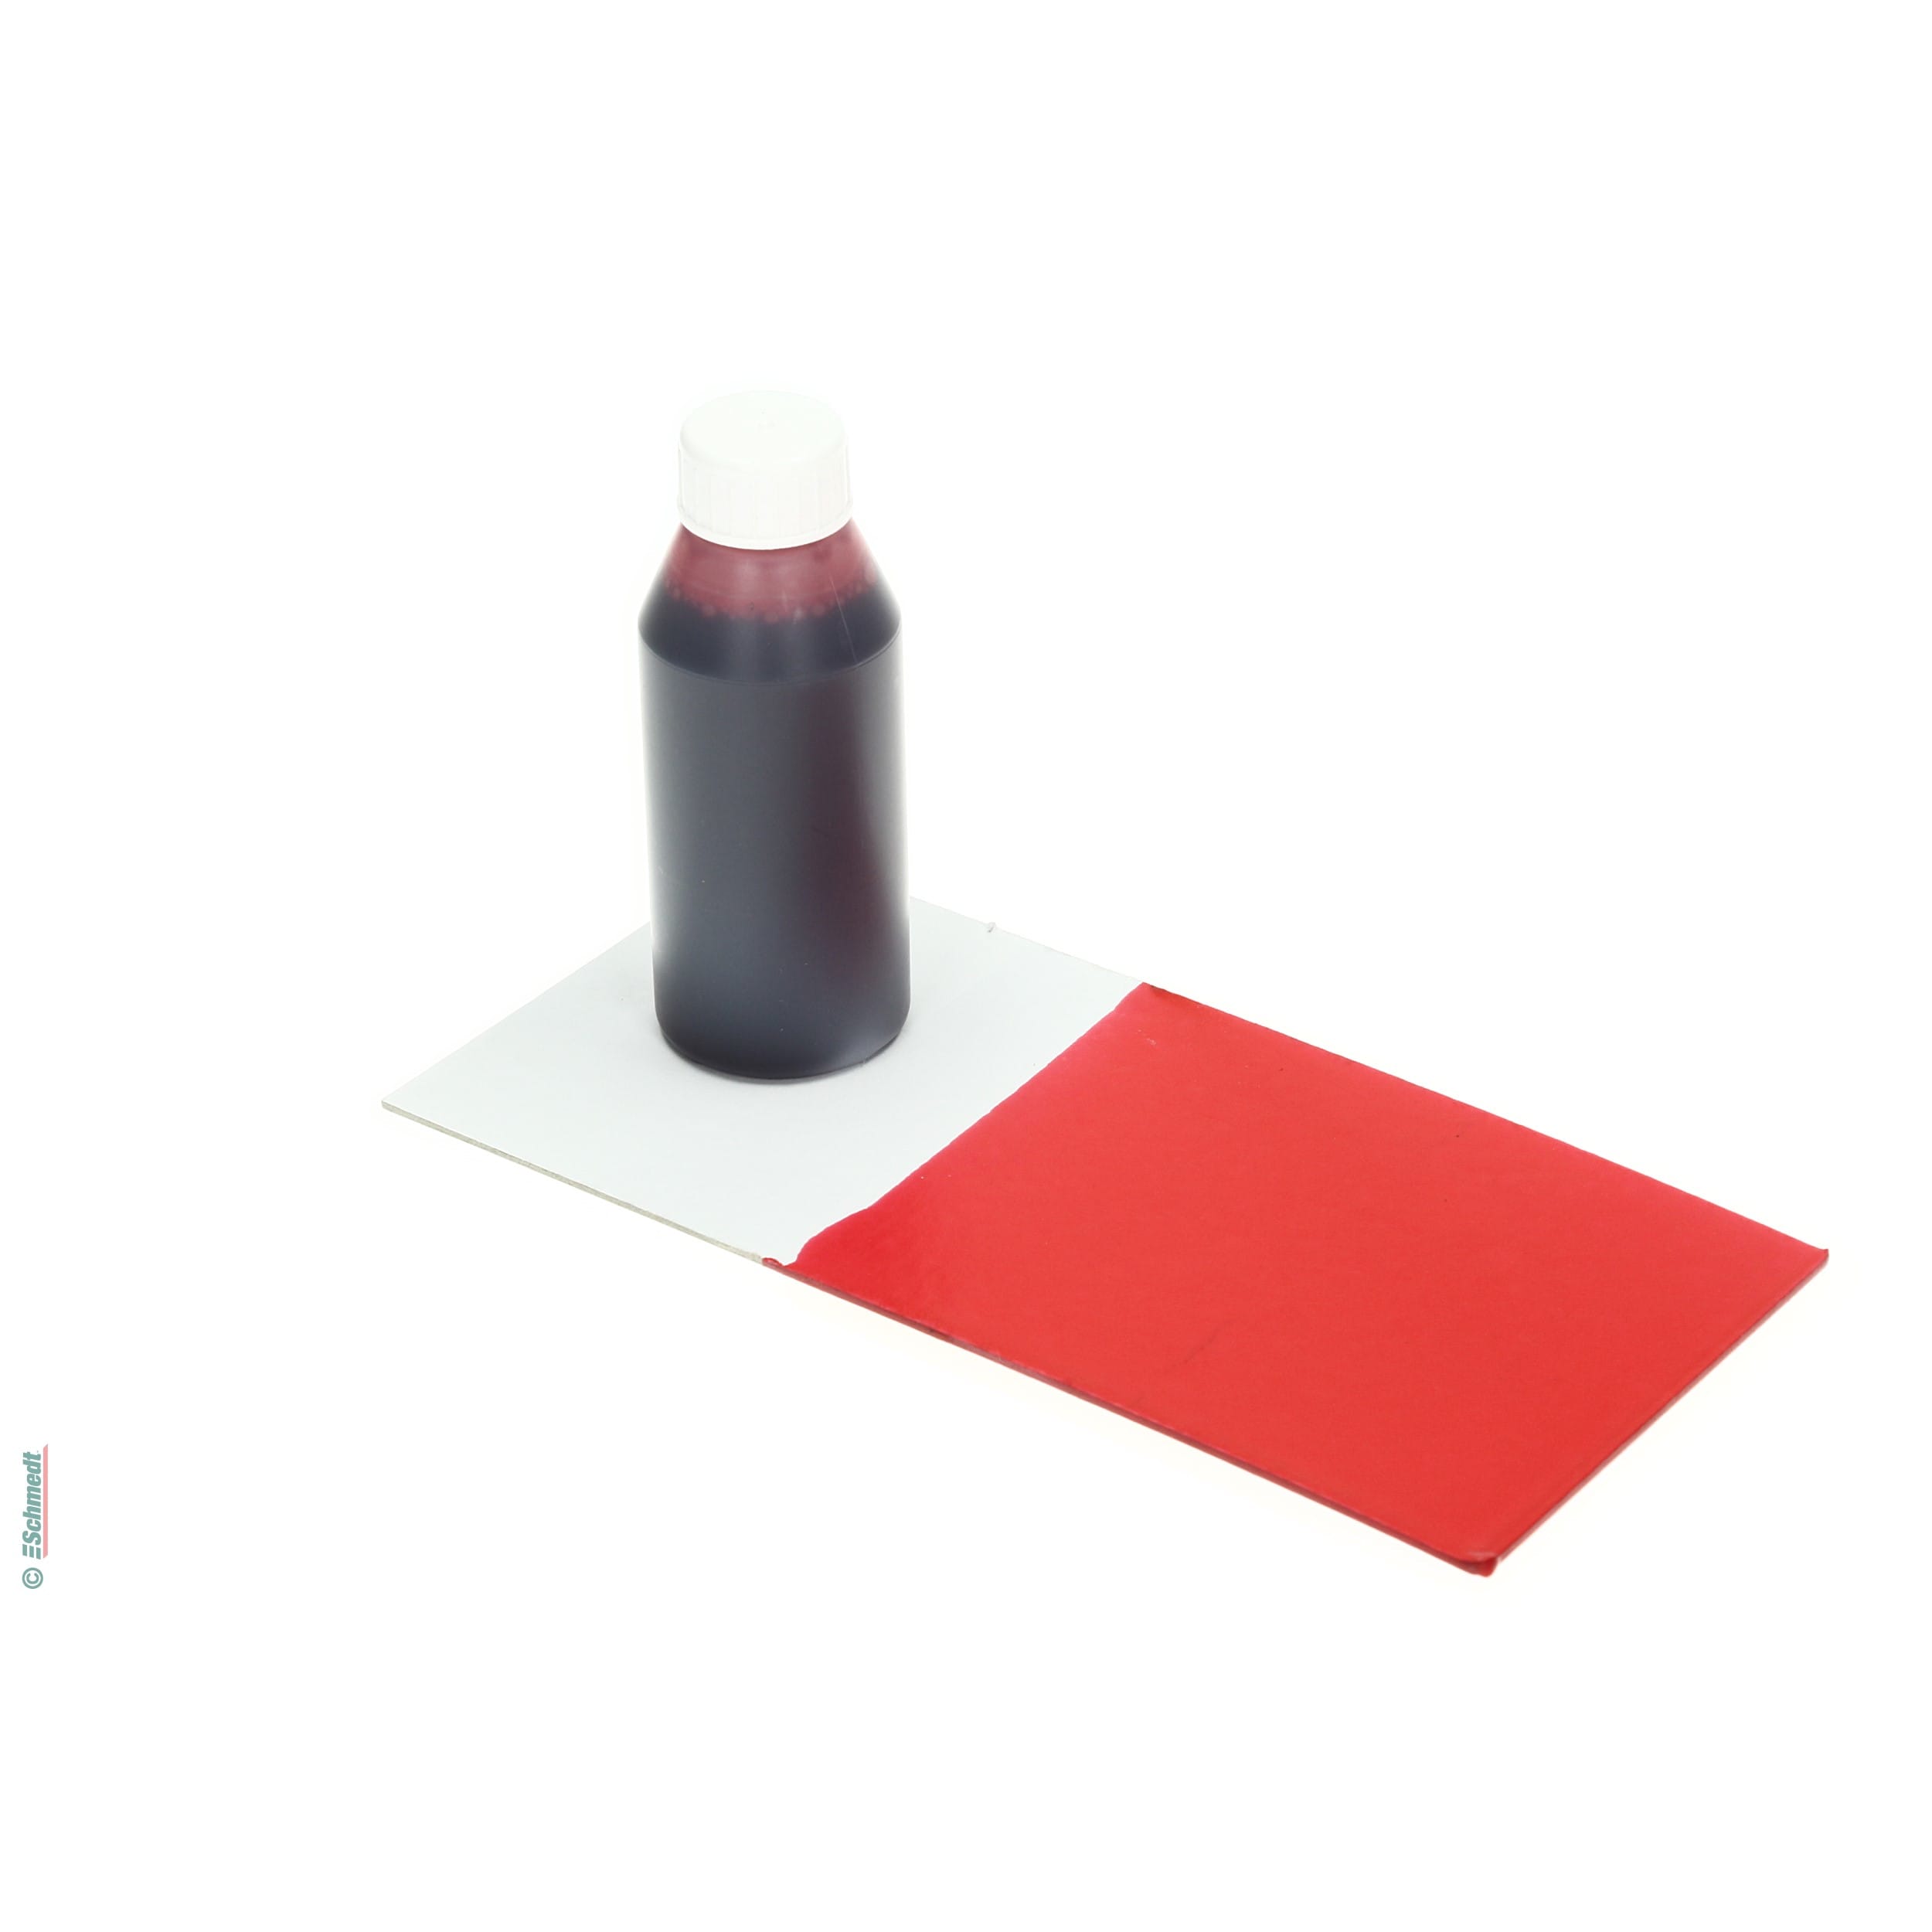 Glue dye - Colour red - Contents Bottle / 100 ml - to dye dispersion glues such as pad-binding or perfect-binding glue to bind note pads or ... - image-1